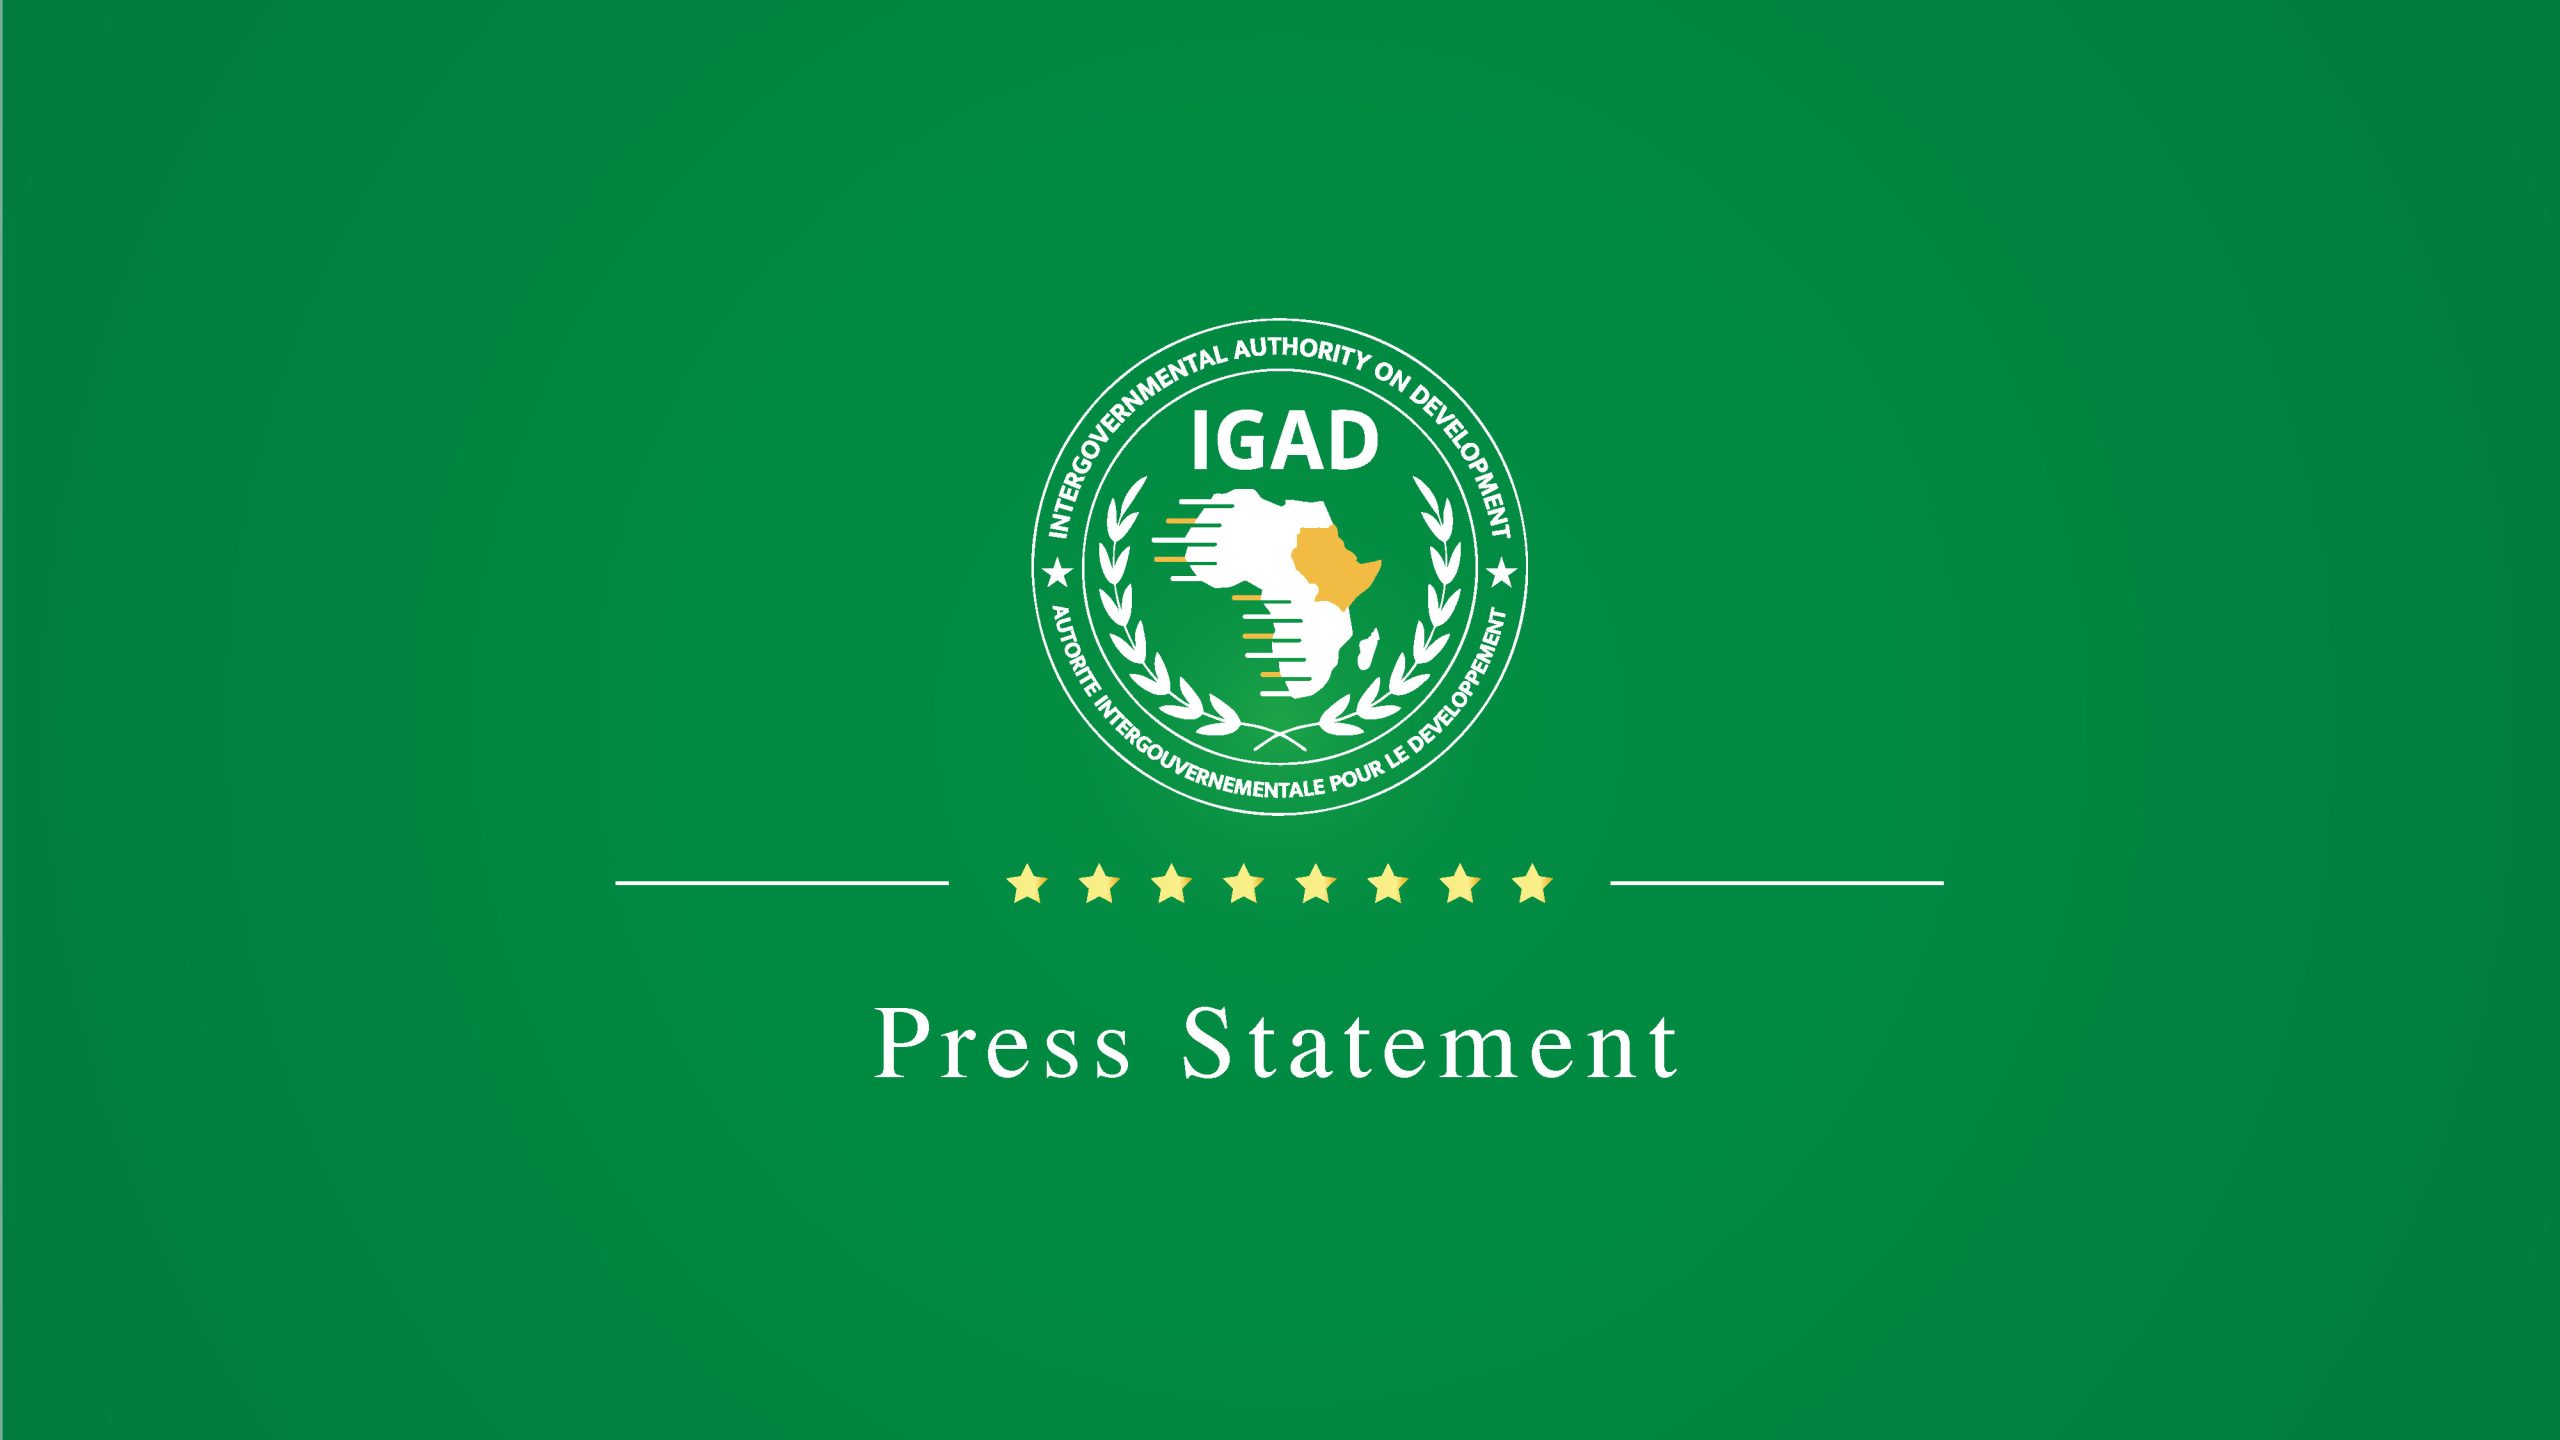 H.E. Dr. Mulatu Teshome, Head of IGAD Election Observation Mission and former President of the Federal Democratic Republic of Ethiopia on the occasion of the departure of observers to deployment sites